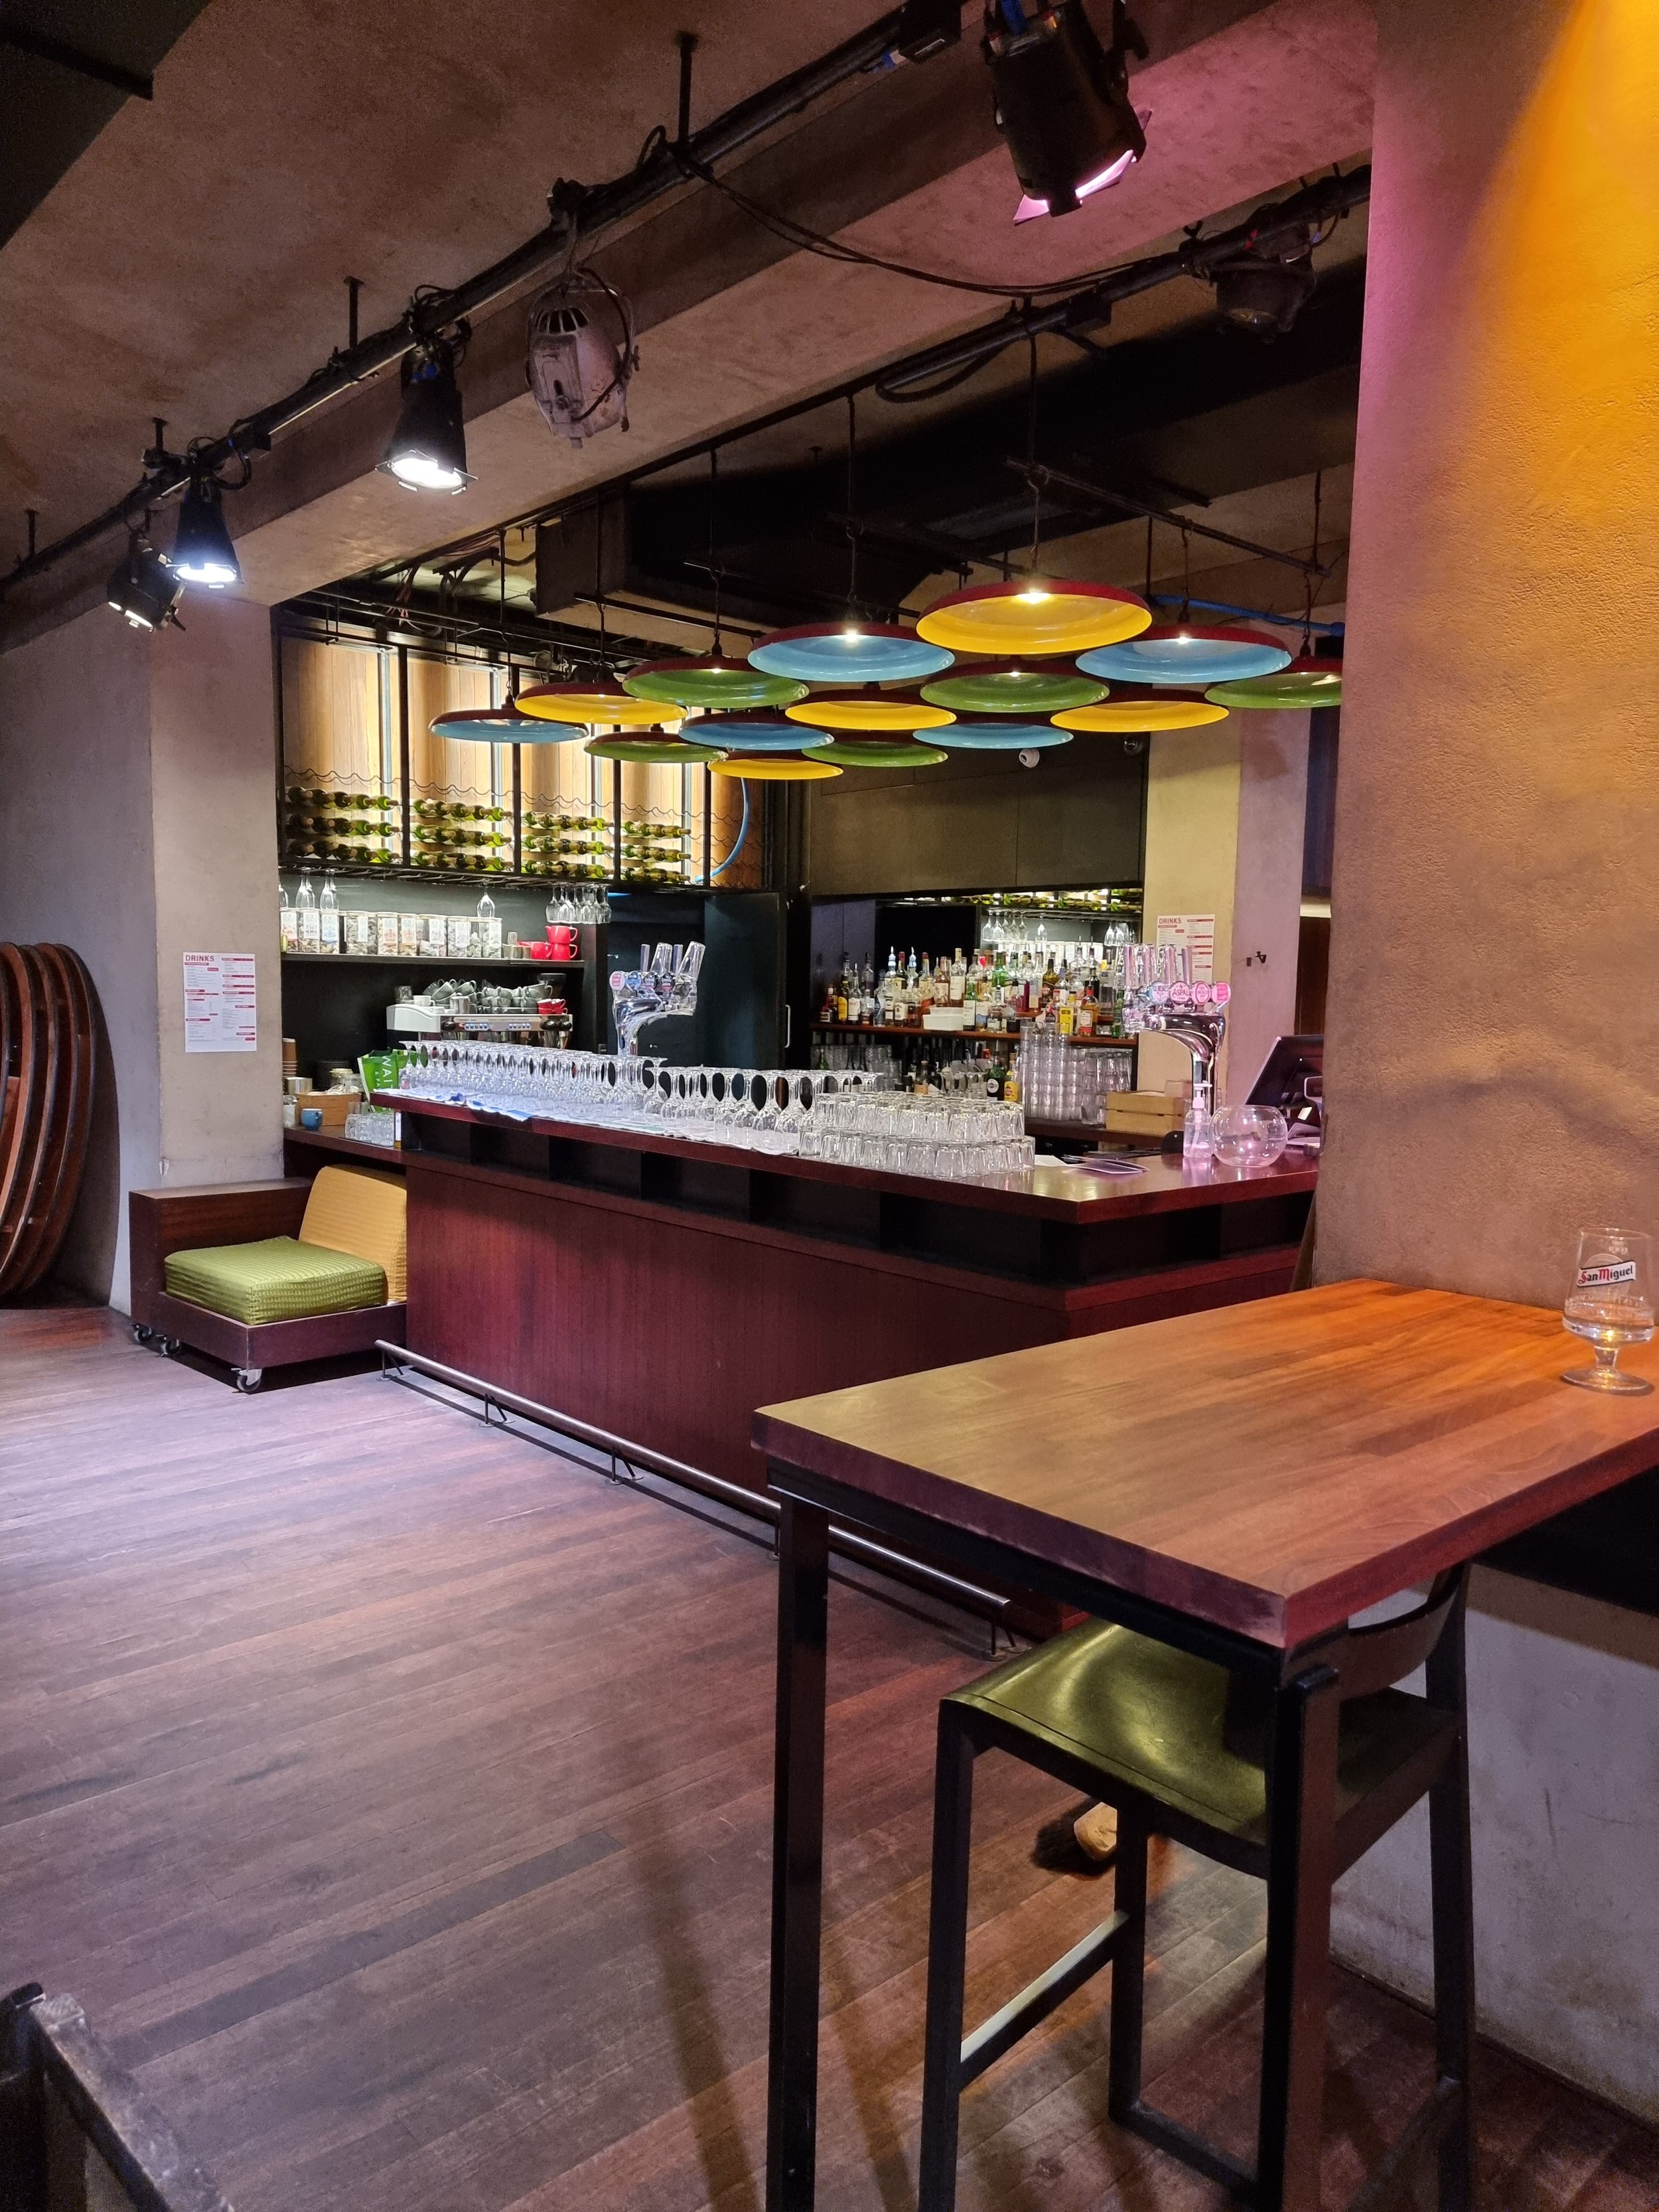 Royal-Court-Theatre-bar-sw1-project-manager.jpg